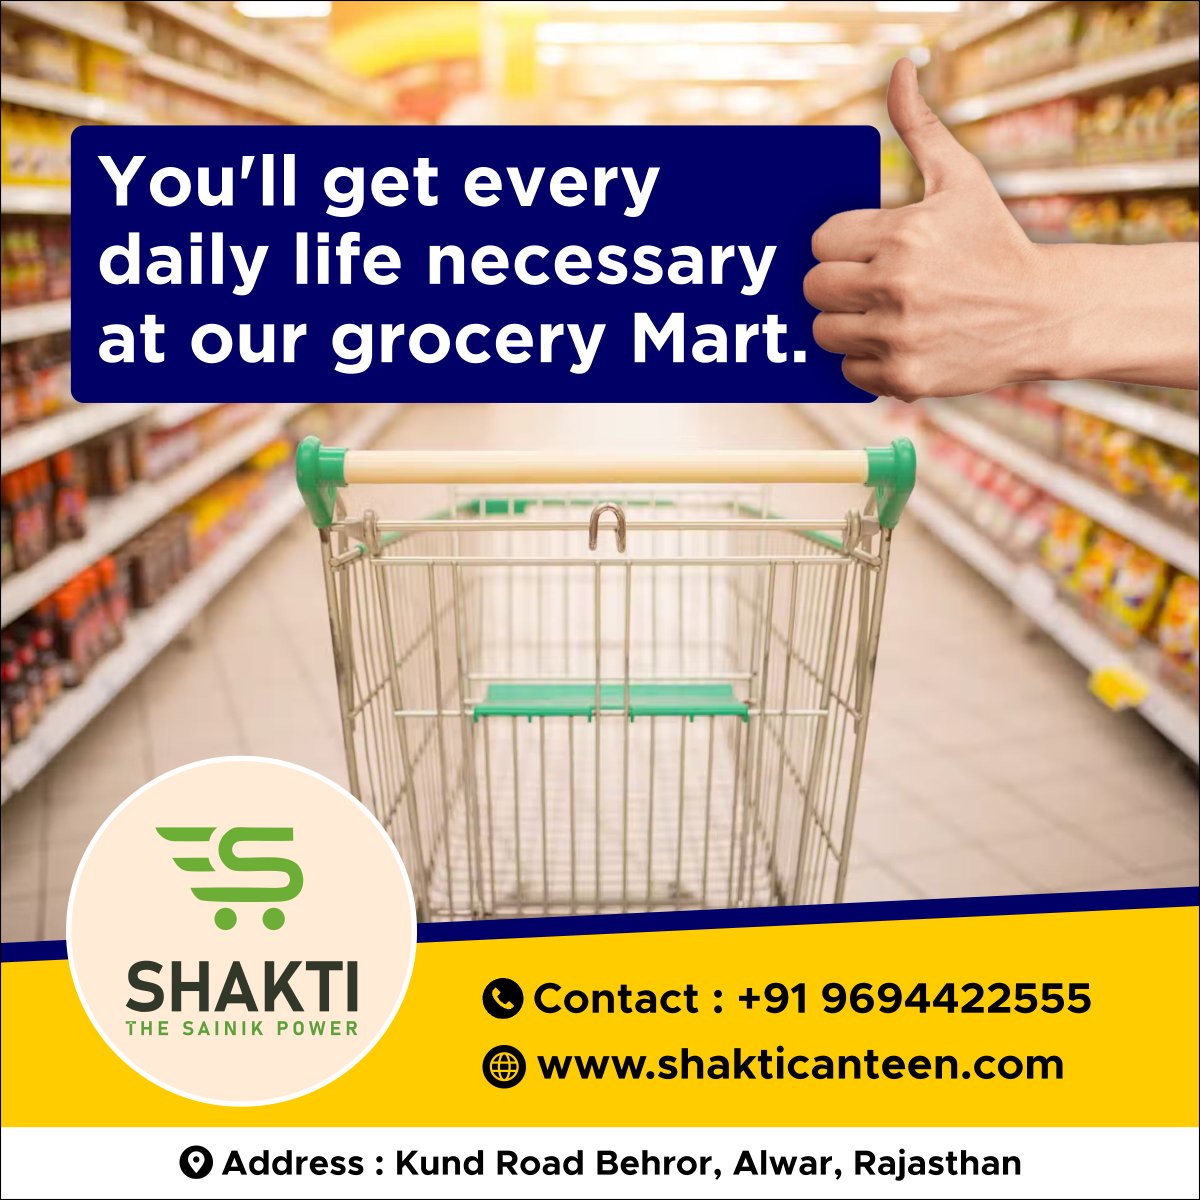 We are one of the most Reliable grocery Mart.
Buy Fresh Food Products Now
.
#grocery #grocerystore #groceryshopping #onlineshopping #shopping #shaktistore #growth #freshproducts